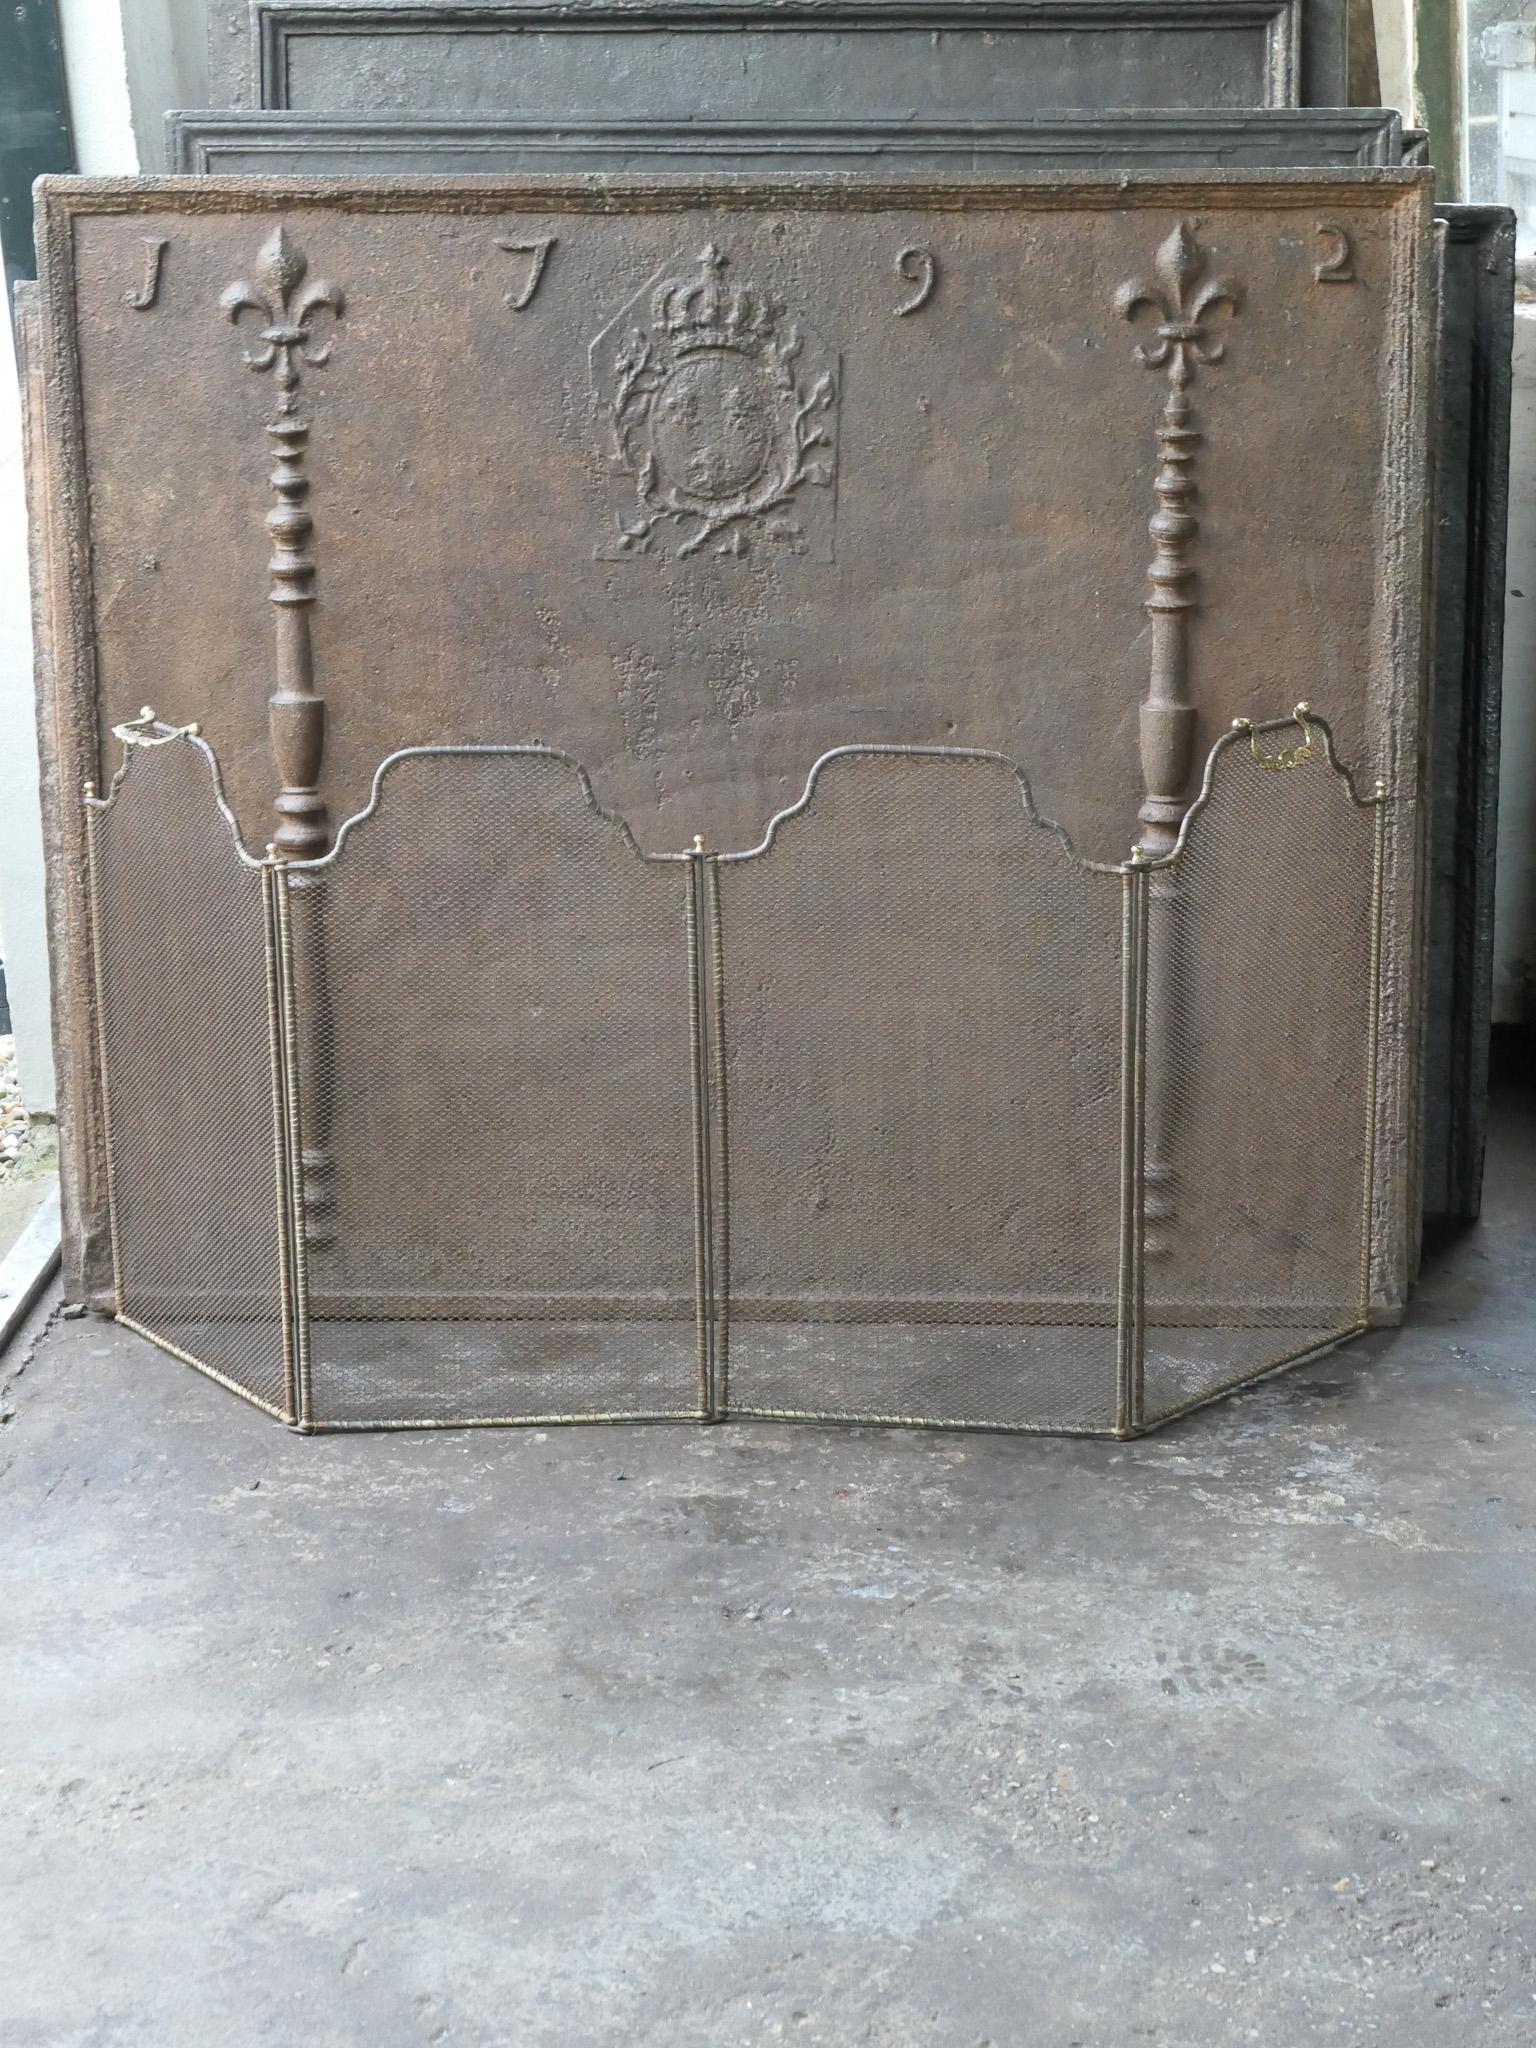 19th century French Napoleon III 4-panel fireplace screen. The screen is made of brass, iron and iron mesh. It is in a good condition and is fit for use in front of the fireplace.